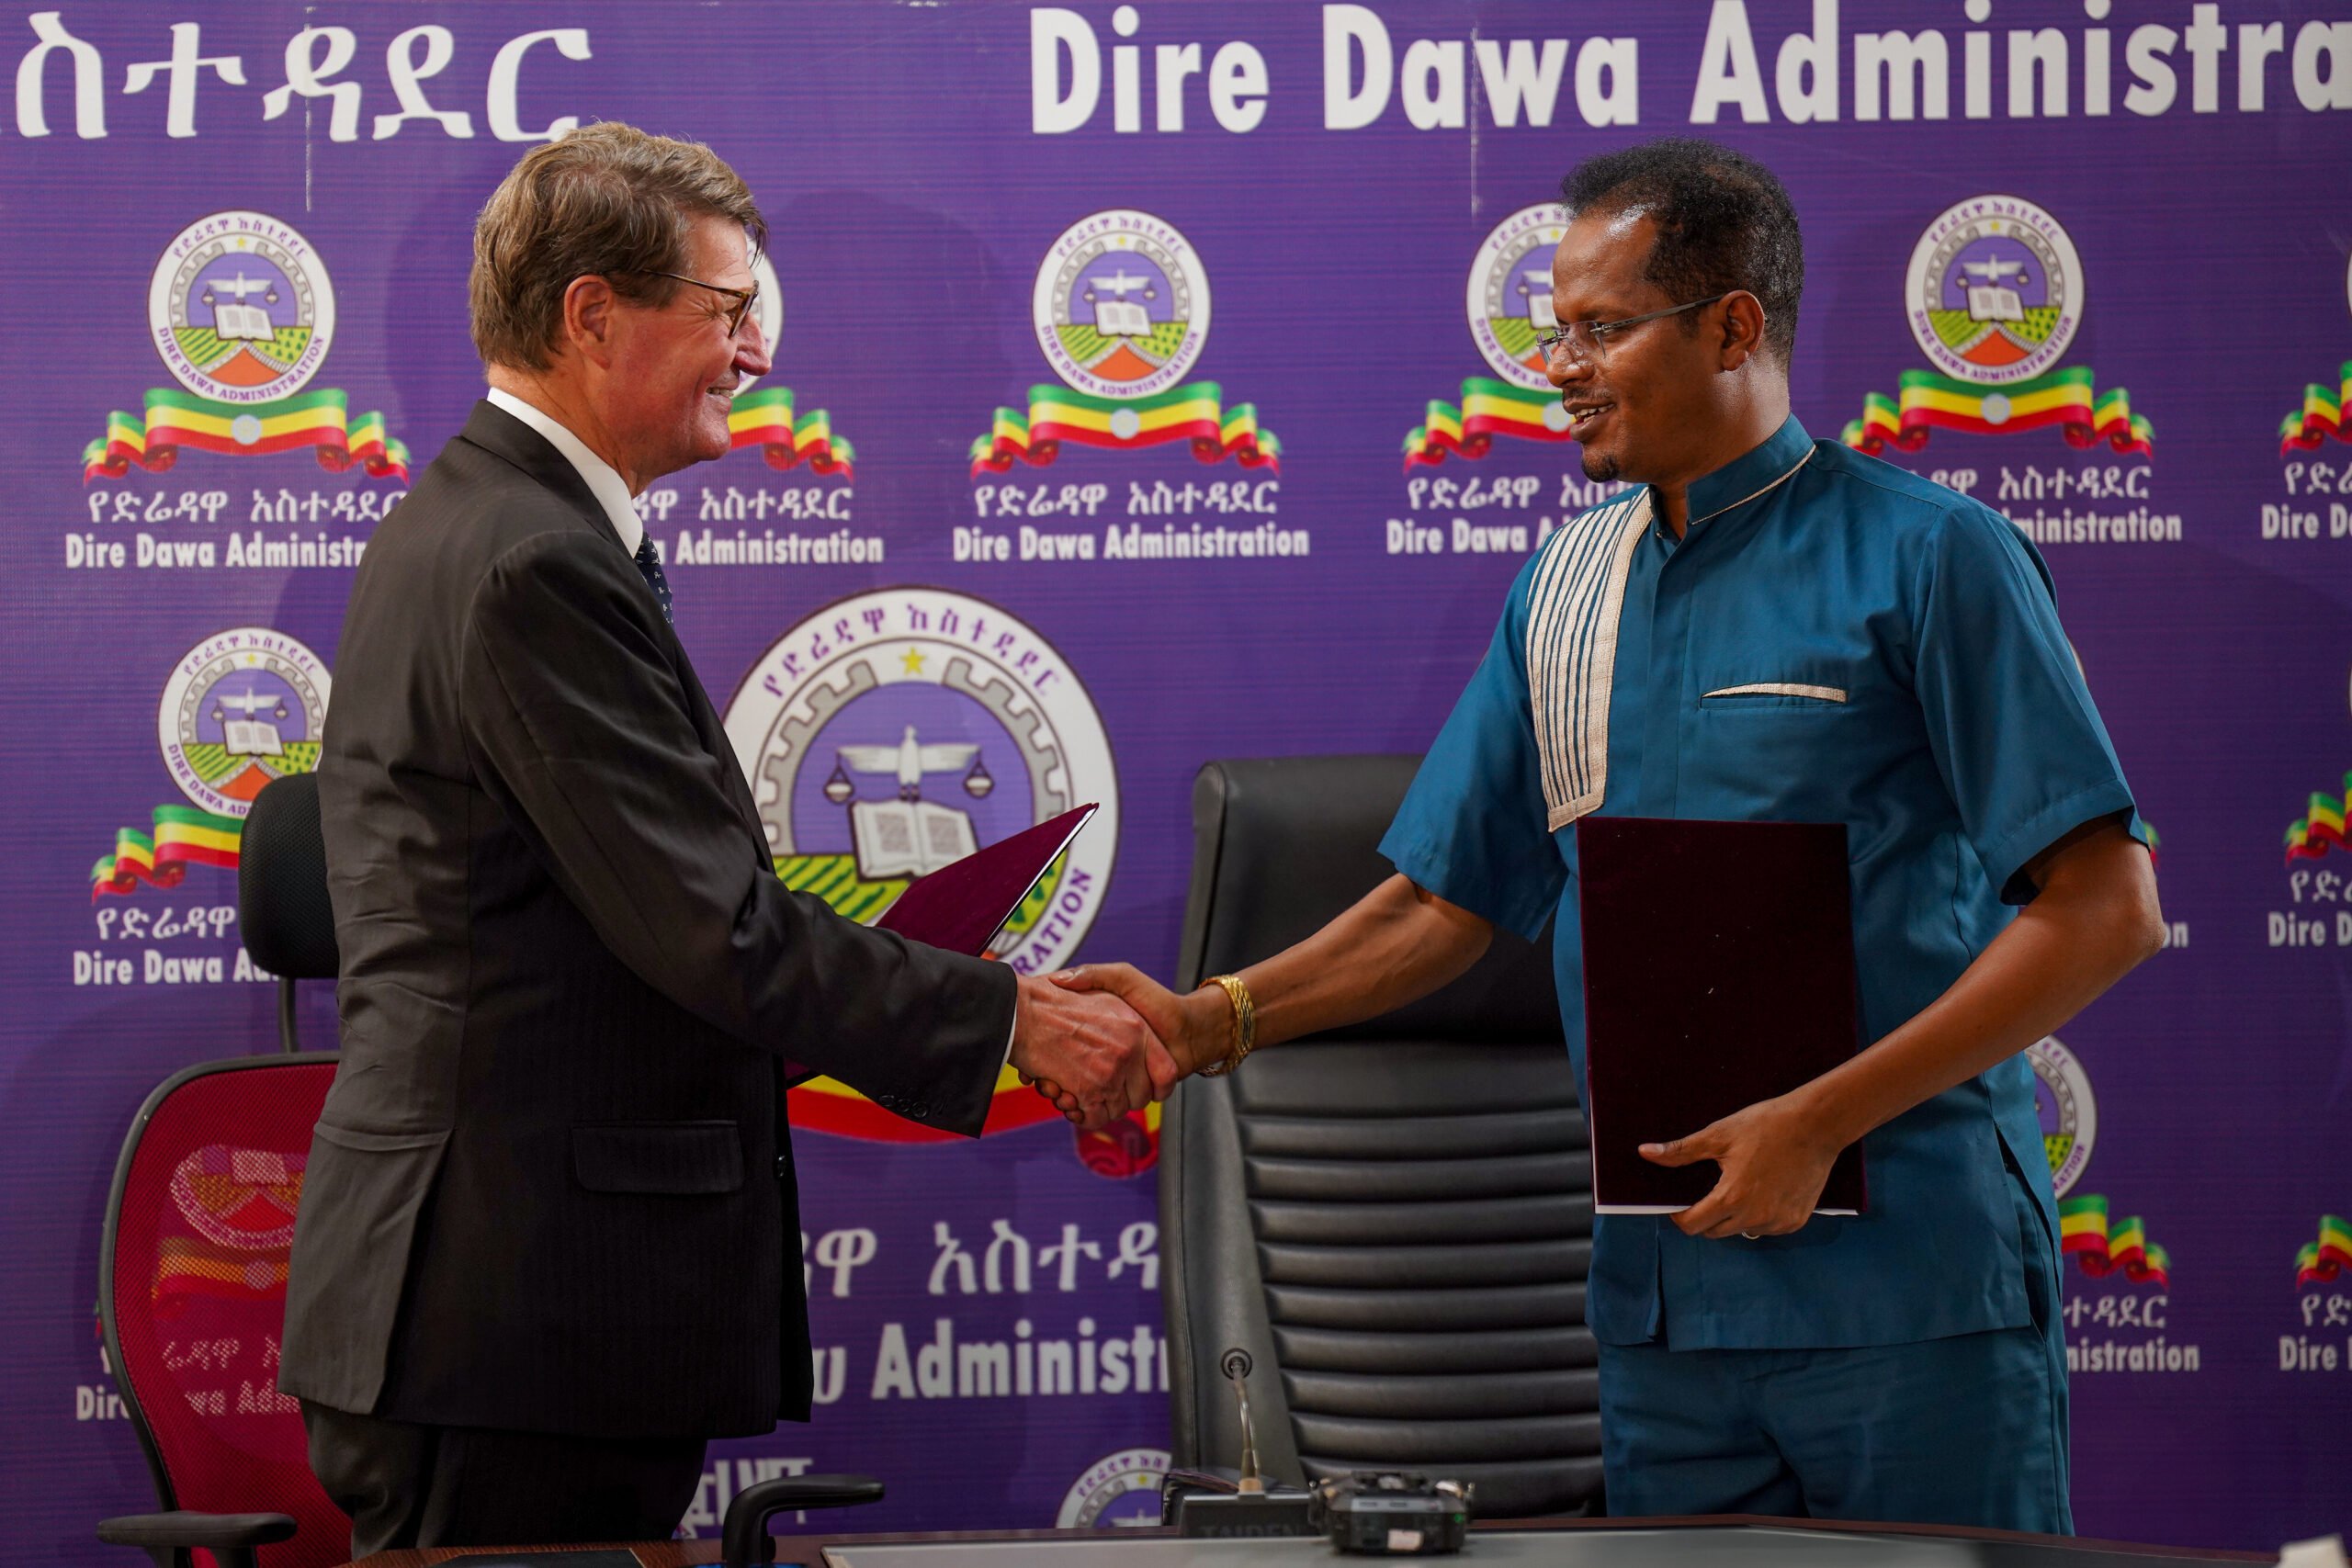 Launch of the Nedamco Africa Catchment-City-Waste (CCW) Water Management Project in Dire Dawa, Ethiopia